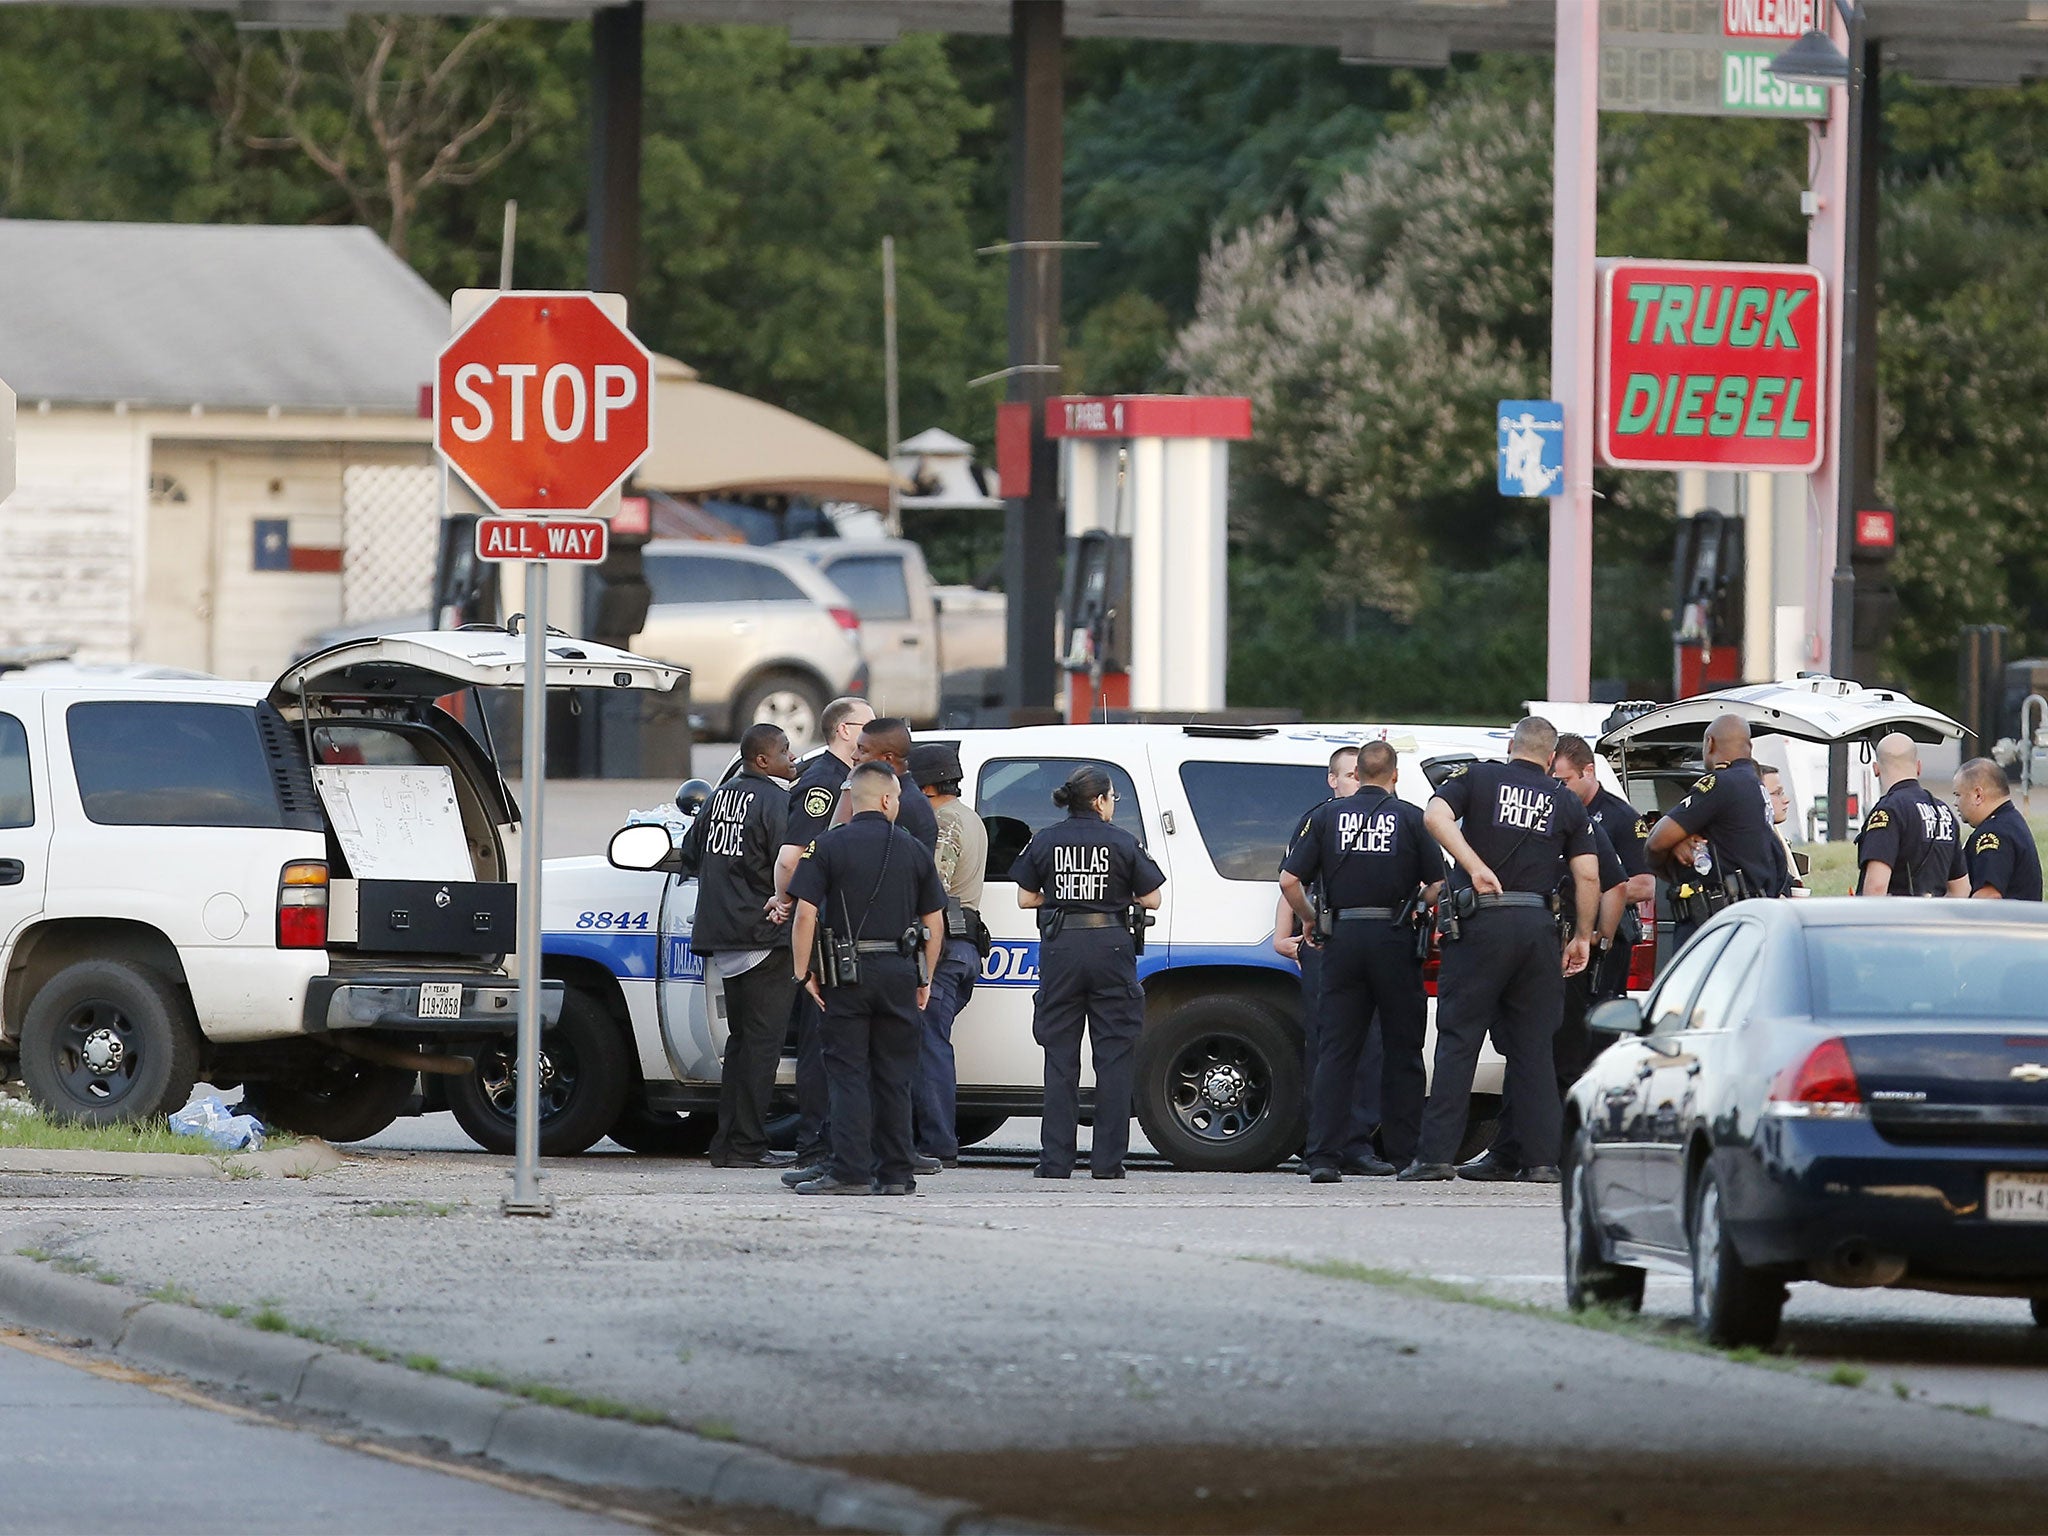 Police block the road following the police chase in southern Dallas